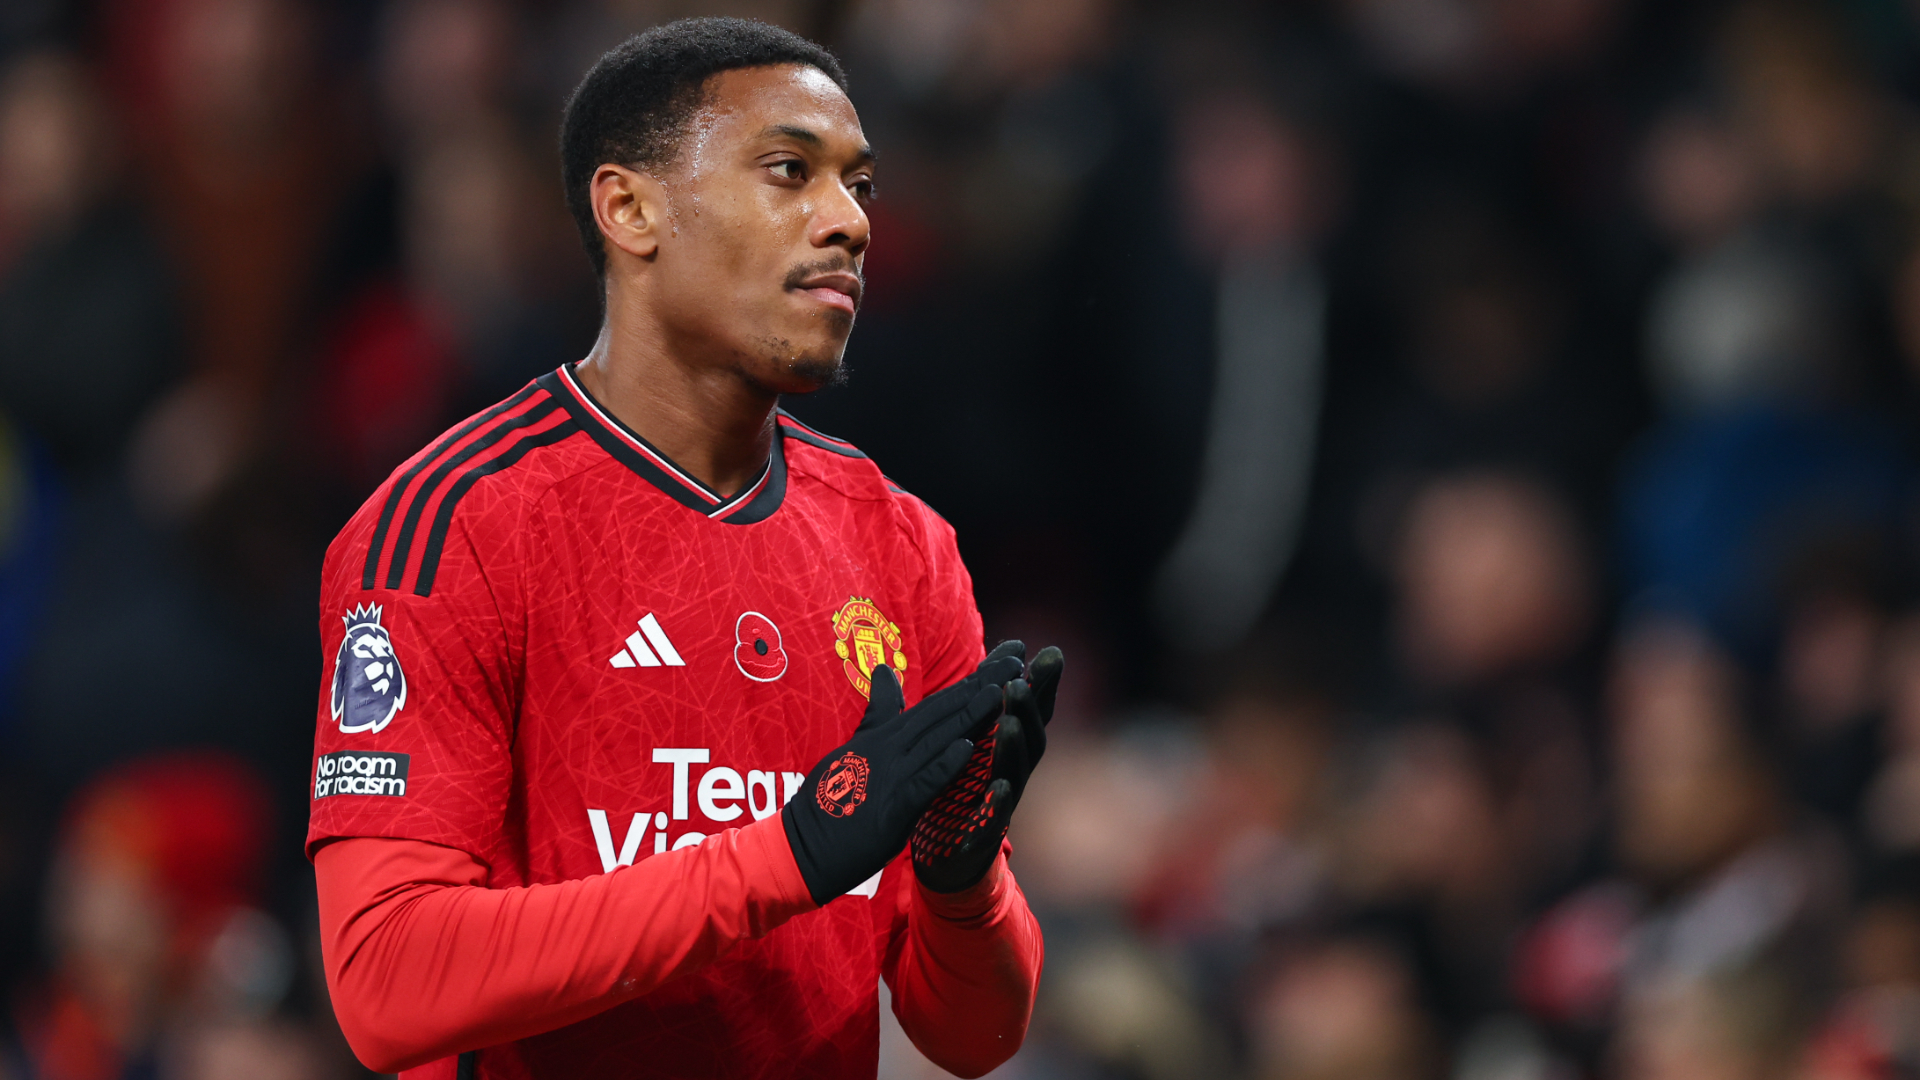 Martial to leave Man Utd